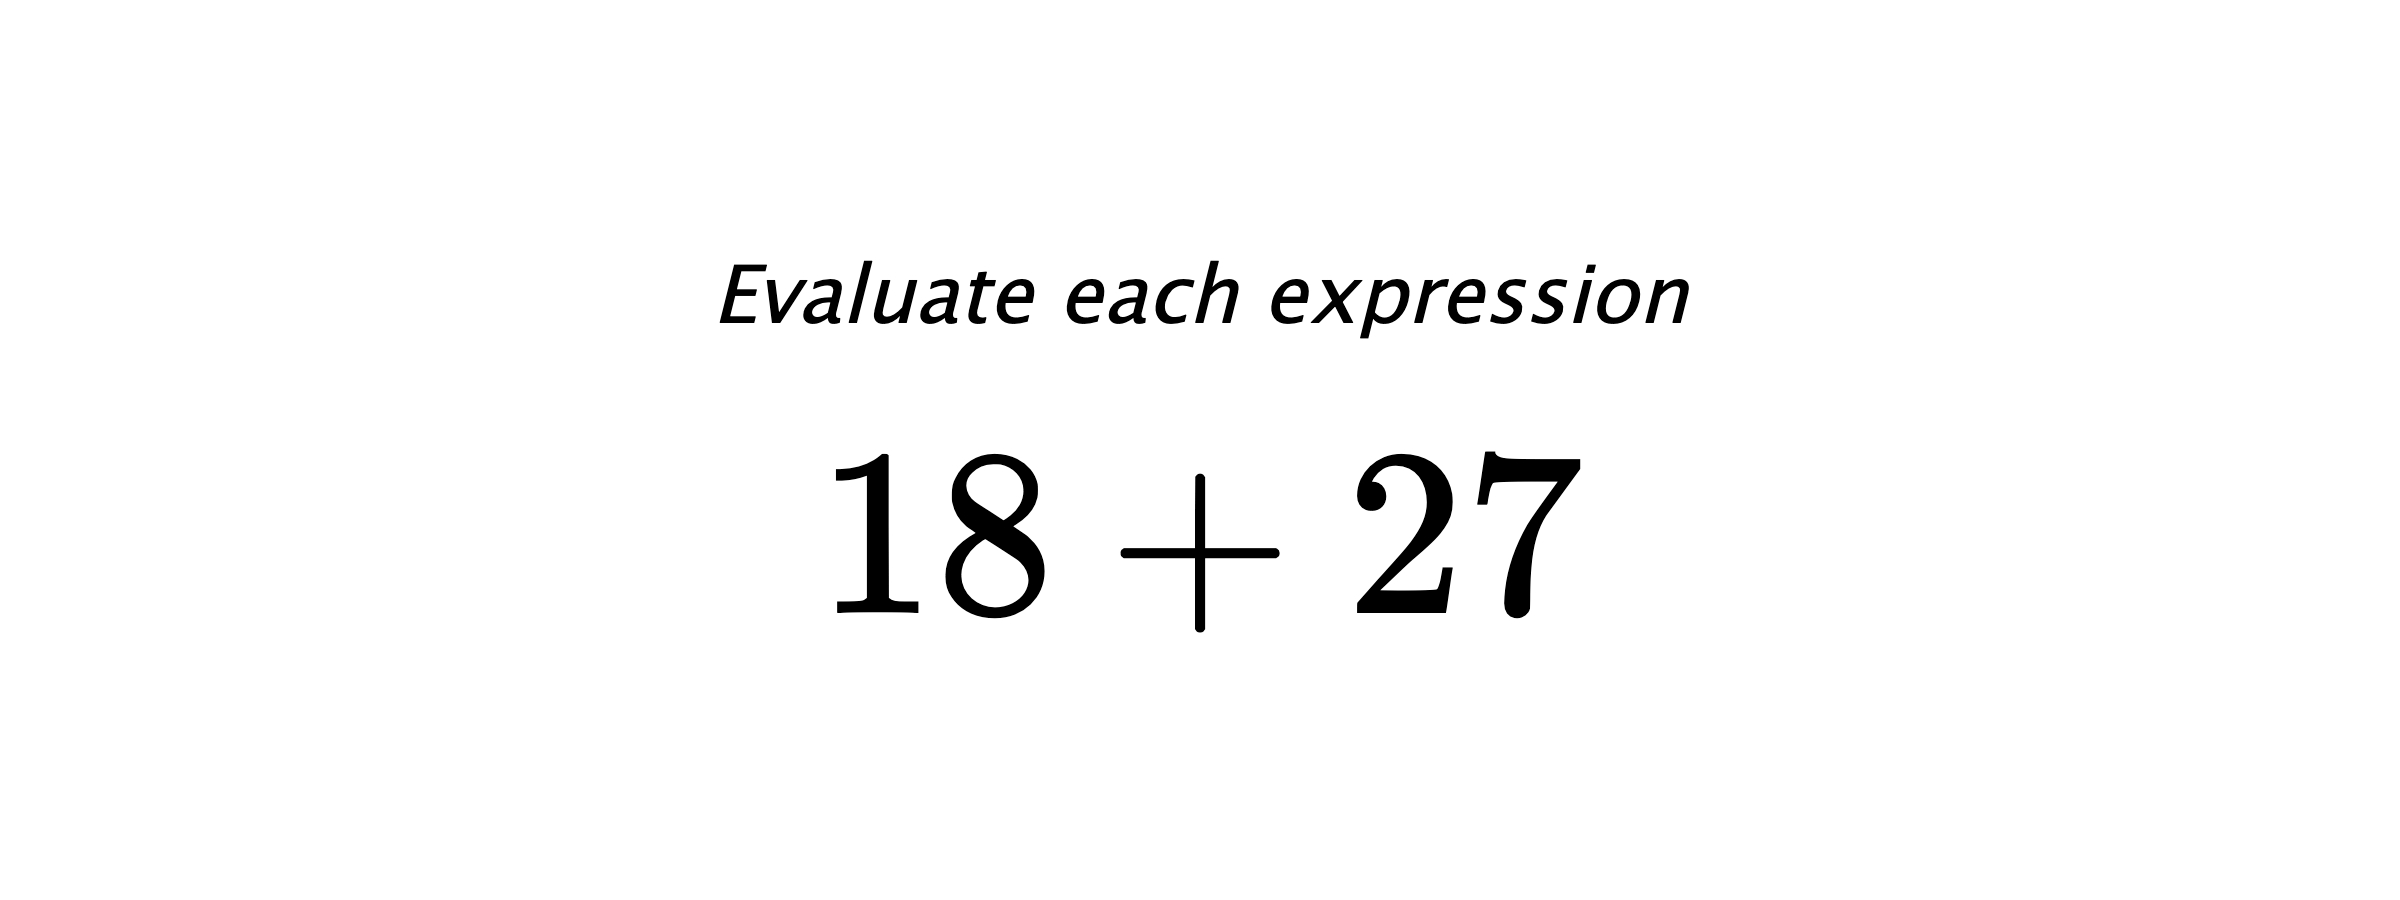 Evaluate each expression $ 18+27 $